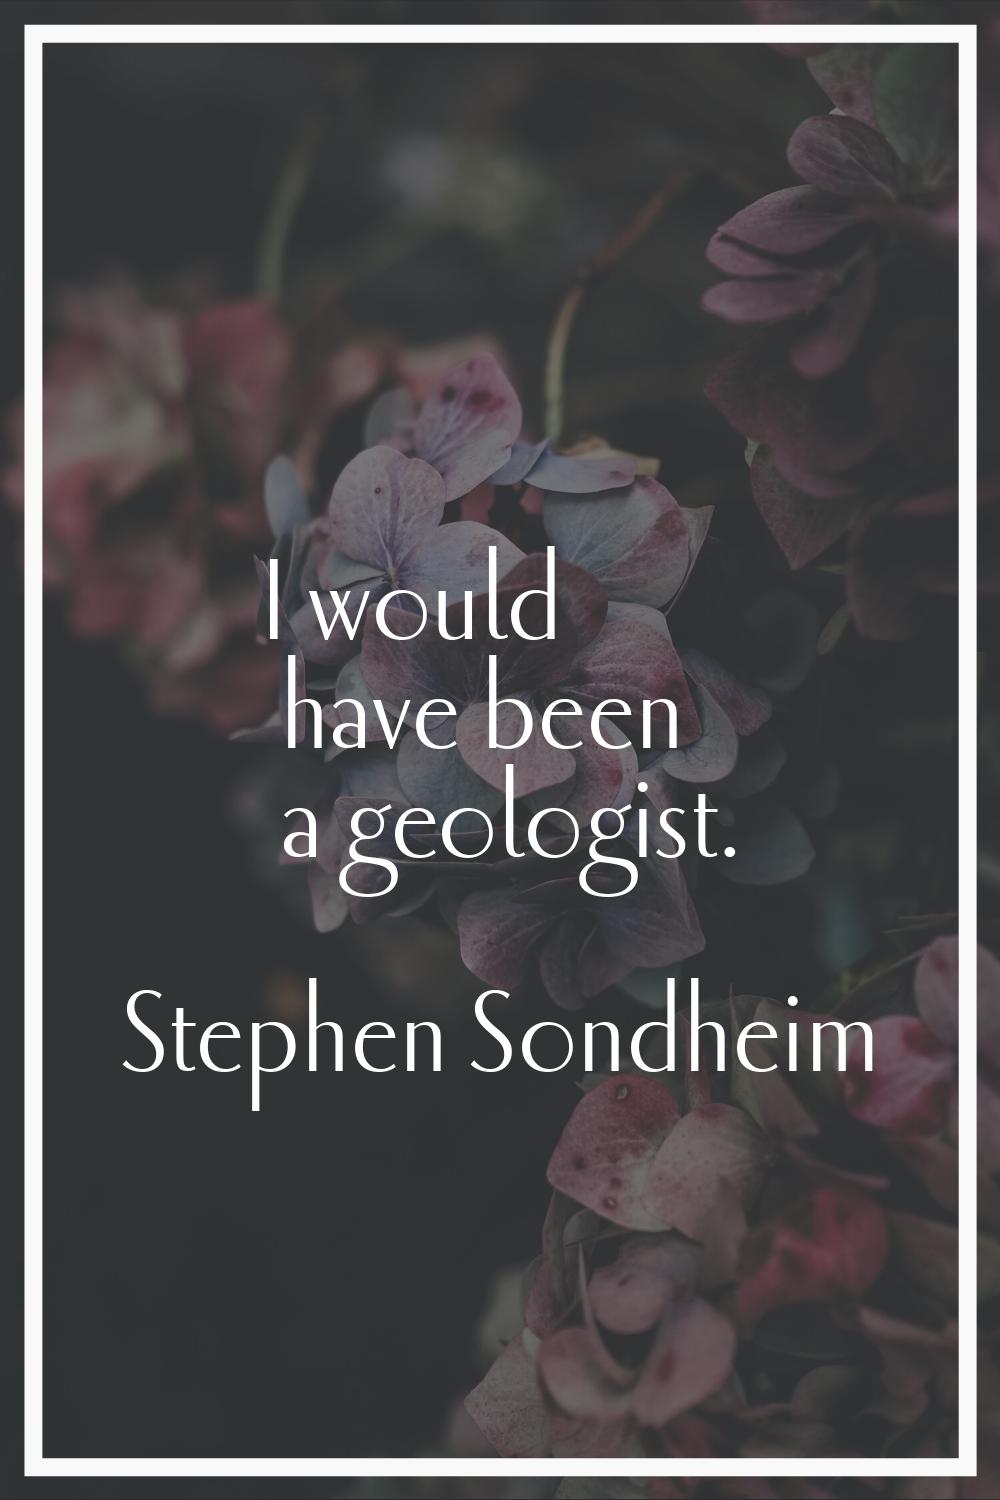 I would have been a geologist.